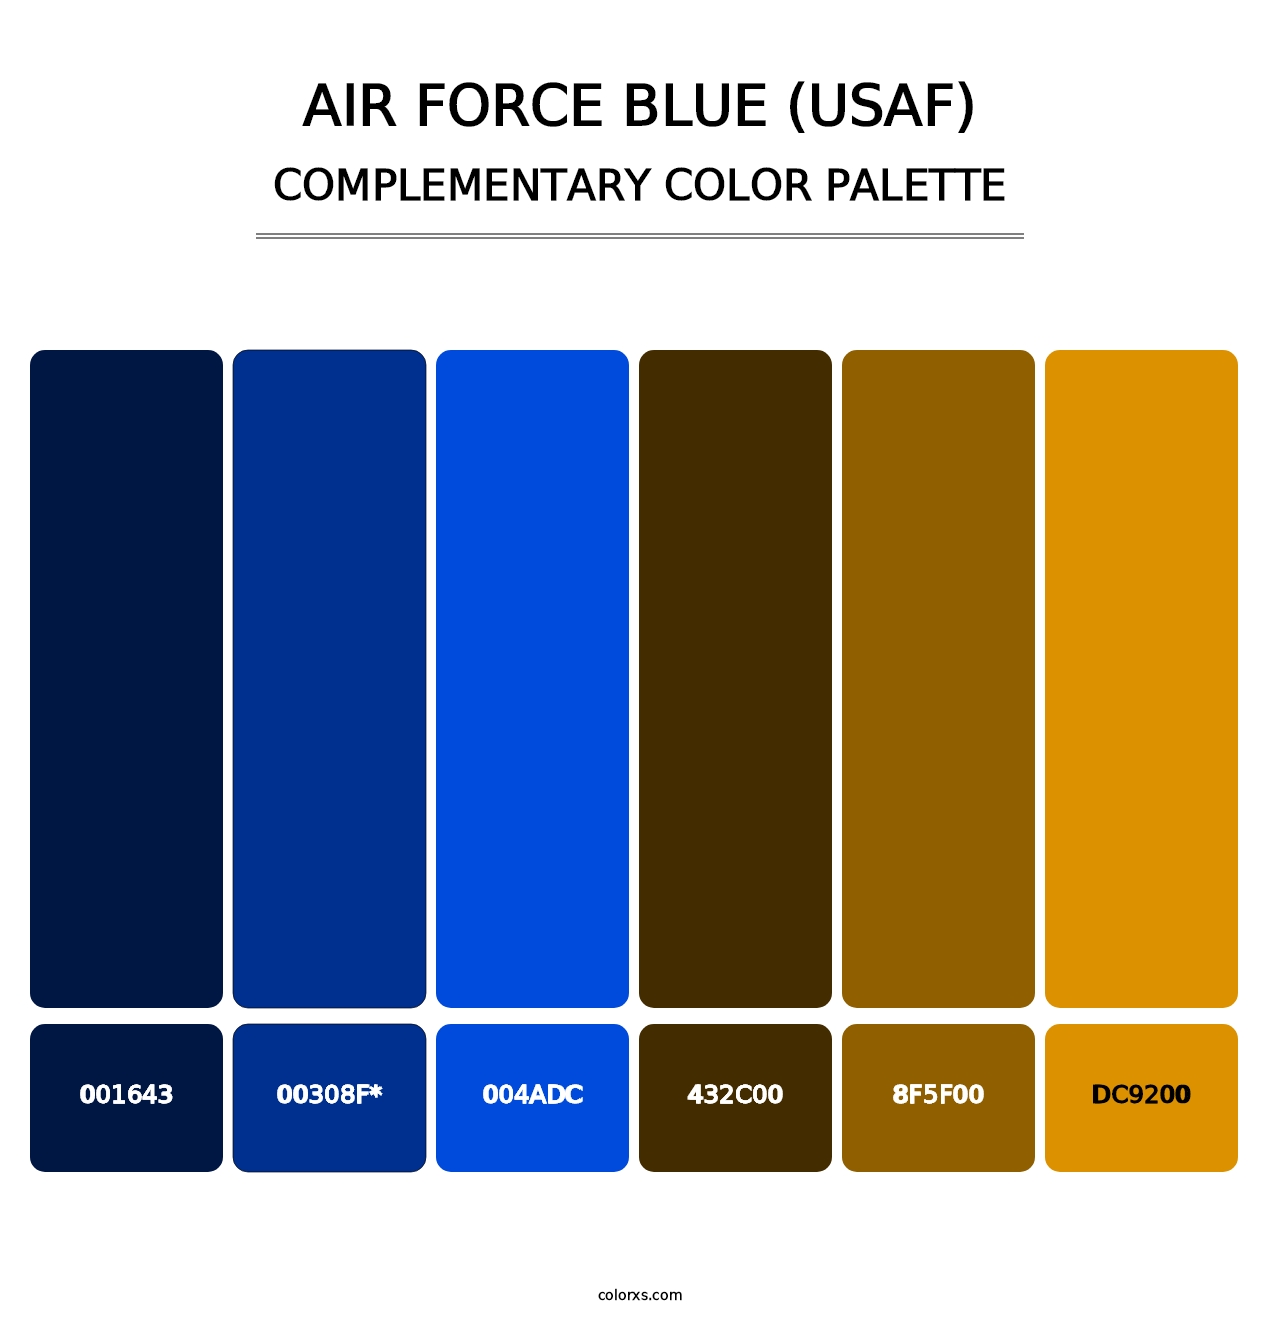 Air Force Blue (USAF) - Complementary Color Palette